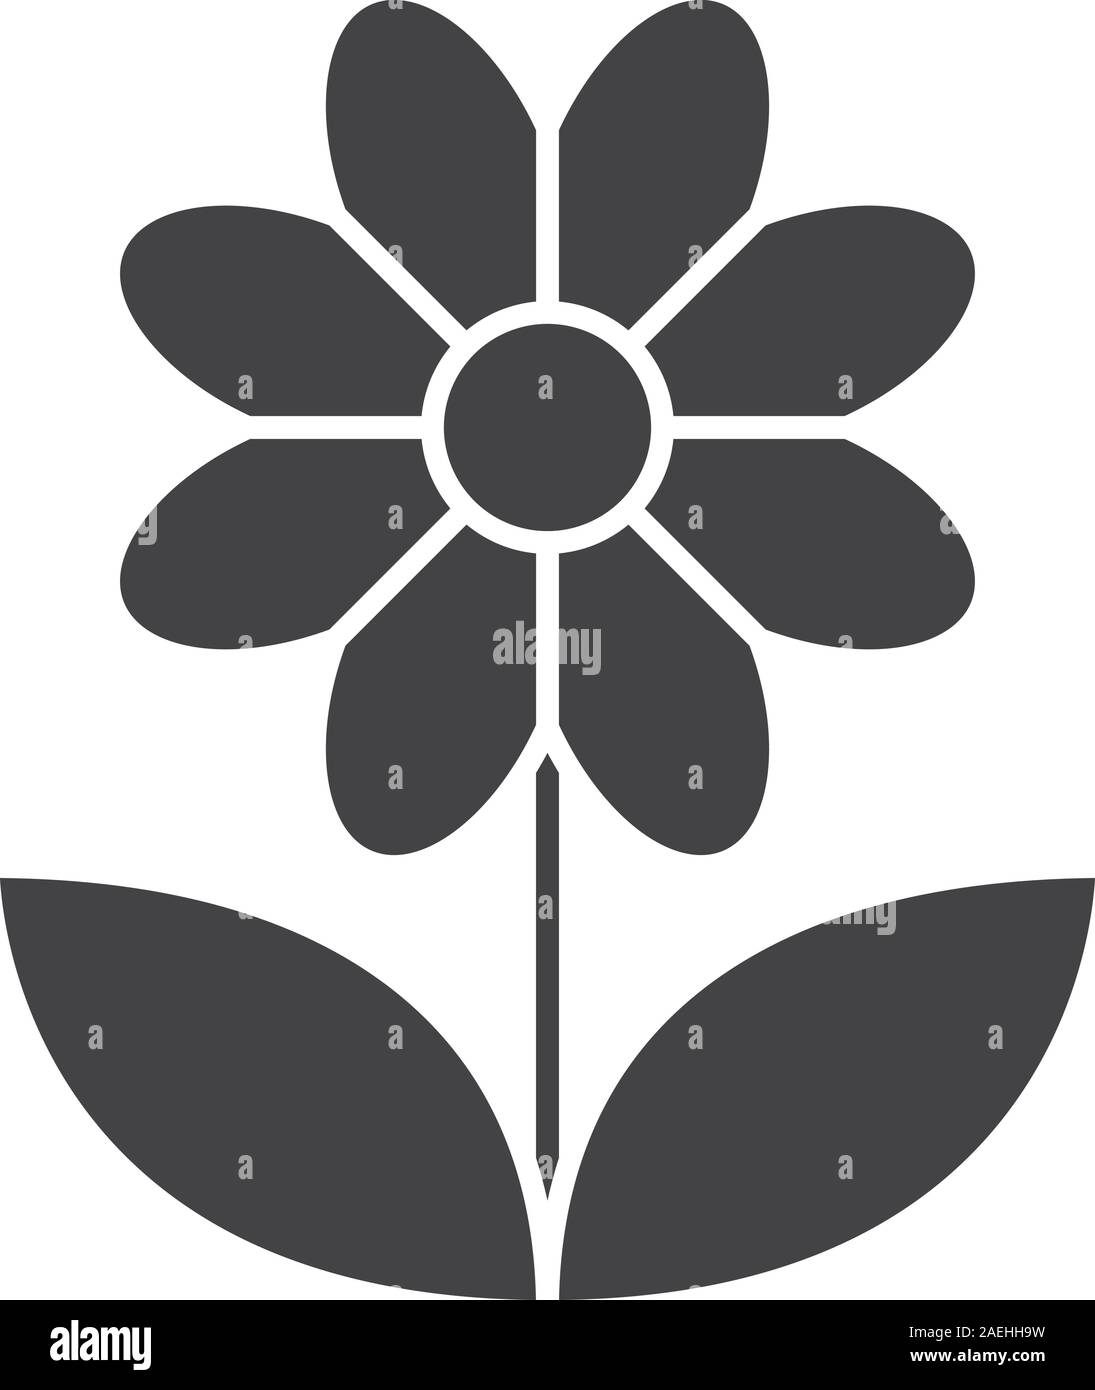 Black and white flower petals silhouette negative space vector